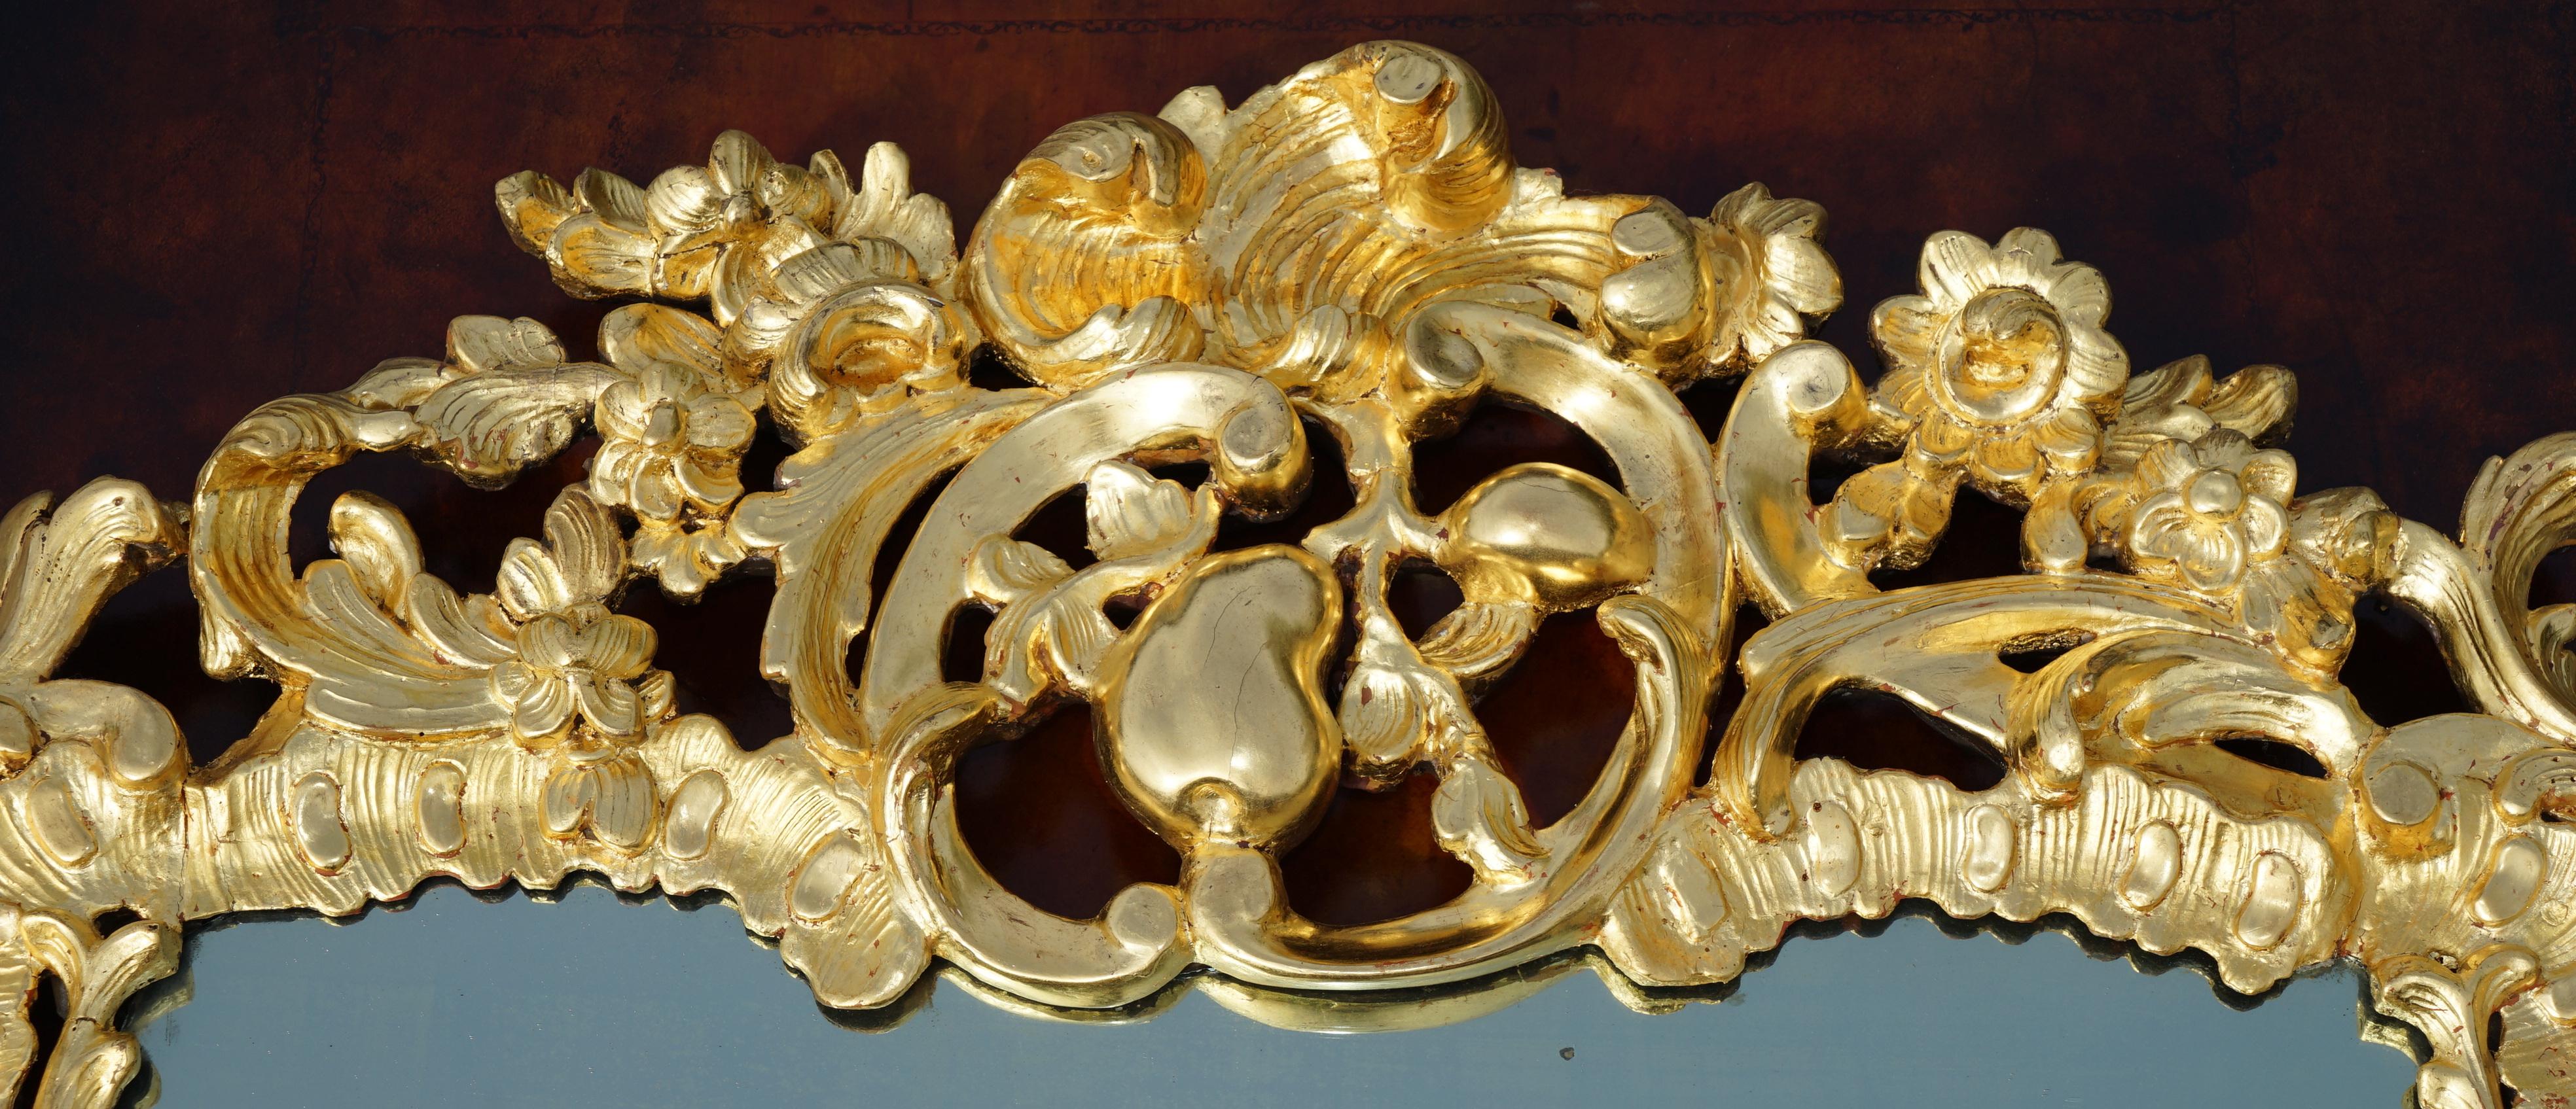 EXQUISITE FRENCH ANTIQUE LOUIS XV PERIOD 1770 GOLD GILT MiRROR WITH FOXED PLATE For Sale 2